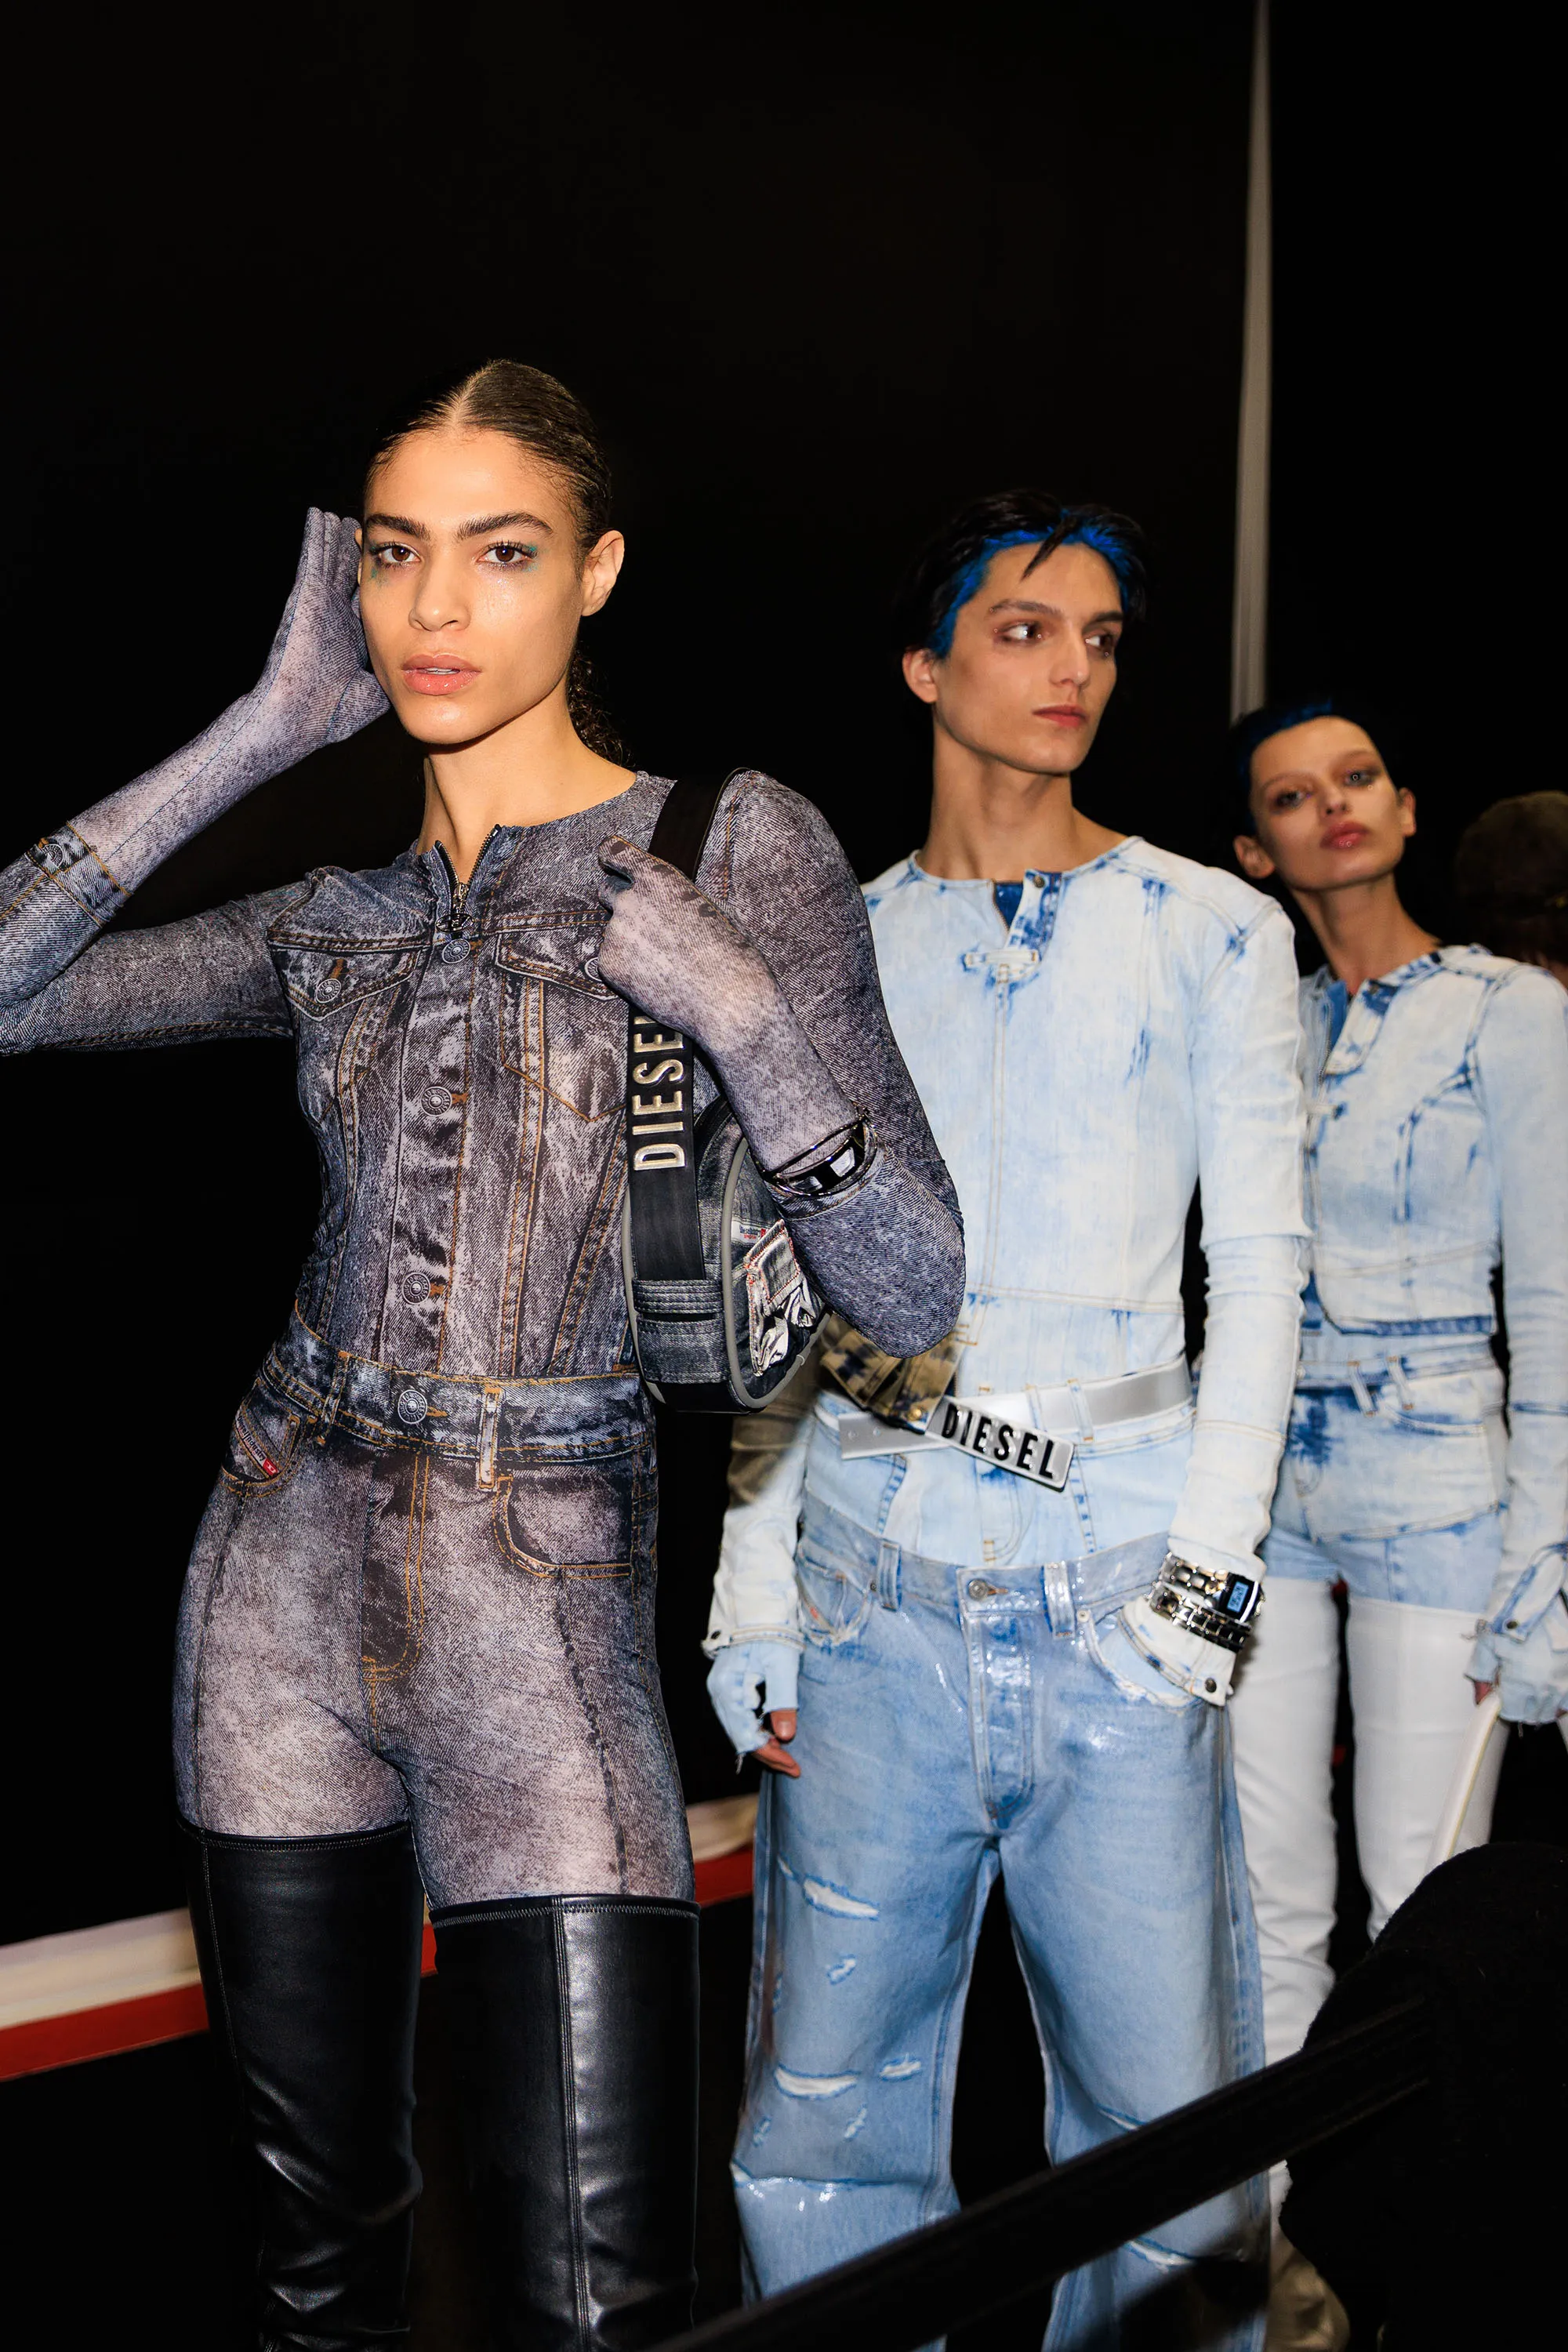 Diesel makes a bold move, livestreaming the show-making process on social media.